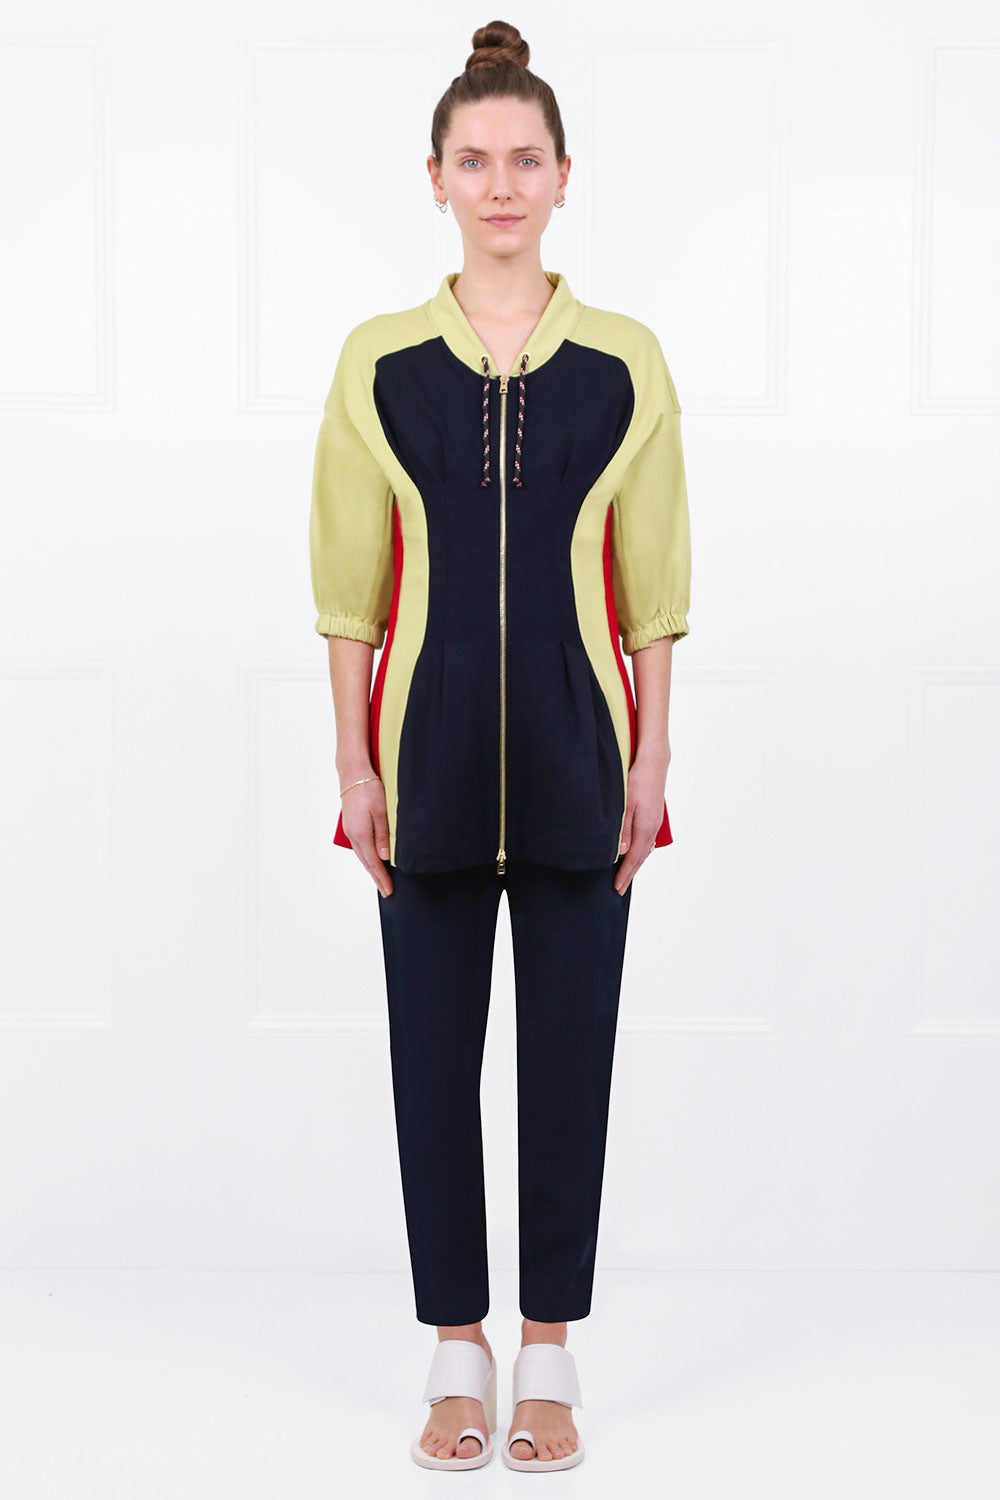 COLVILLE RTW KICKER TOP | NAVY/LIME/RED